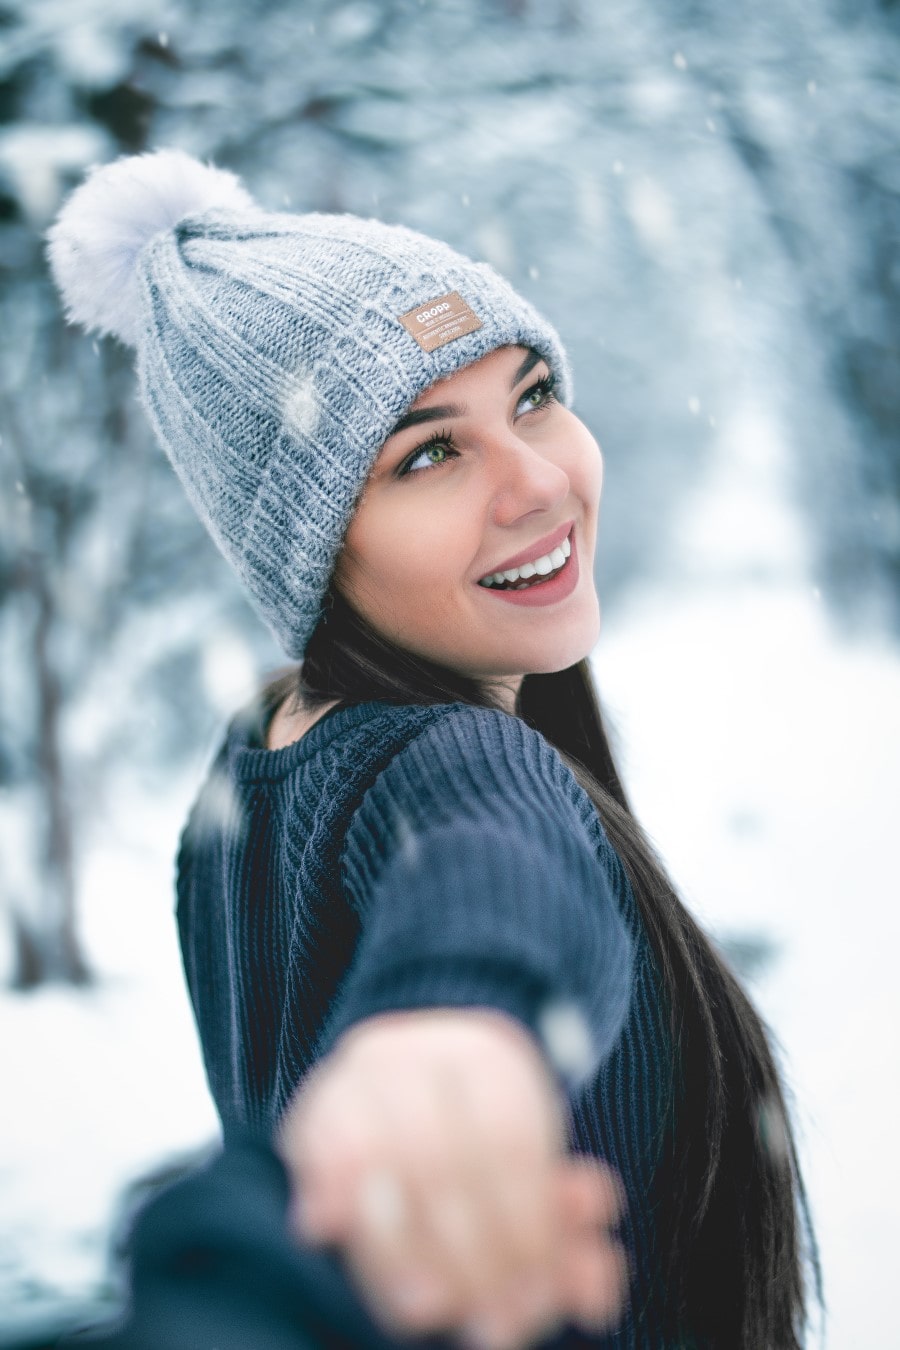 Put Your Best Face Forward This Holiday Season With Dermal Fillers